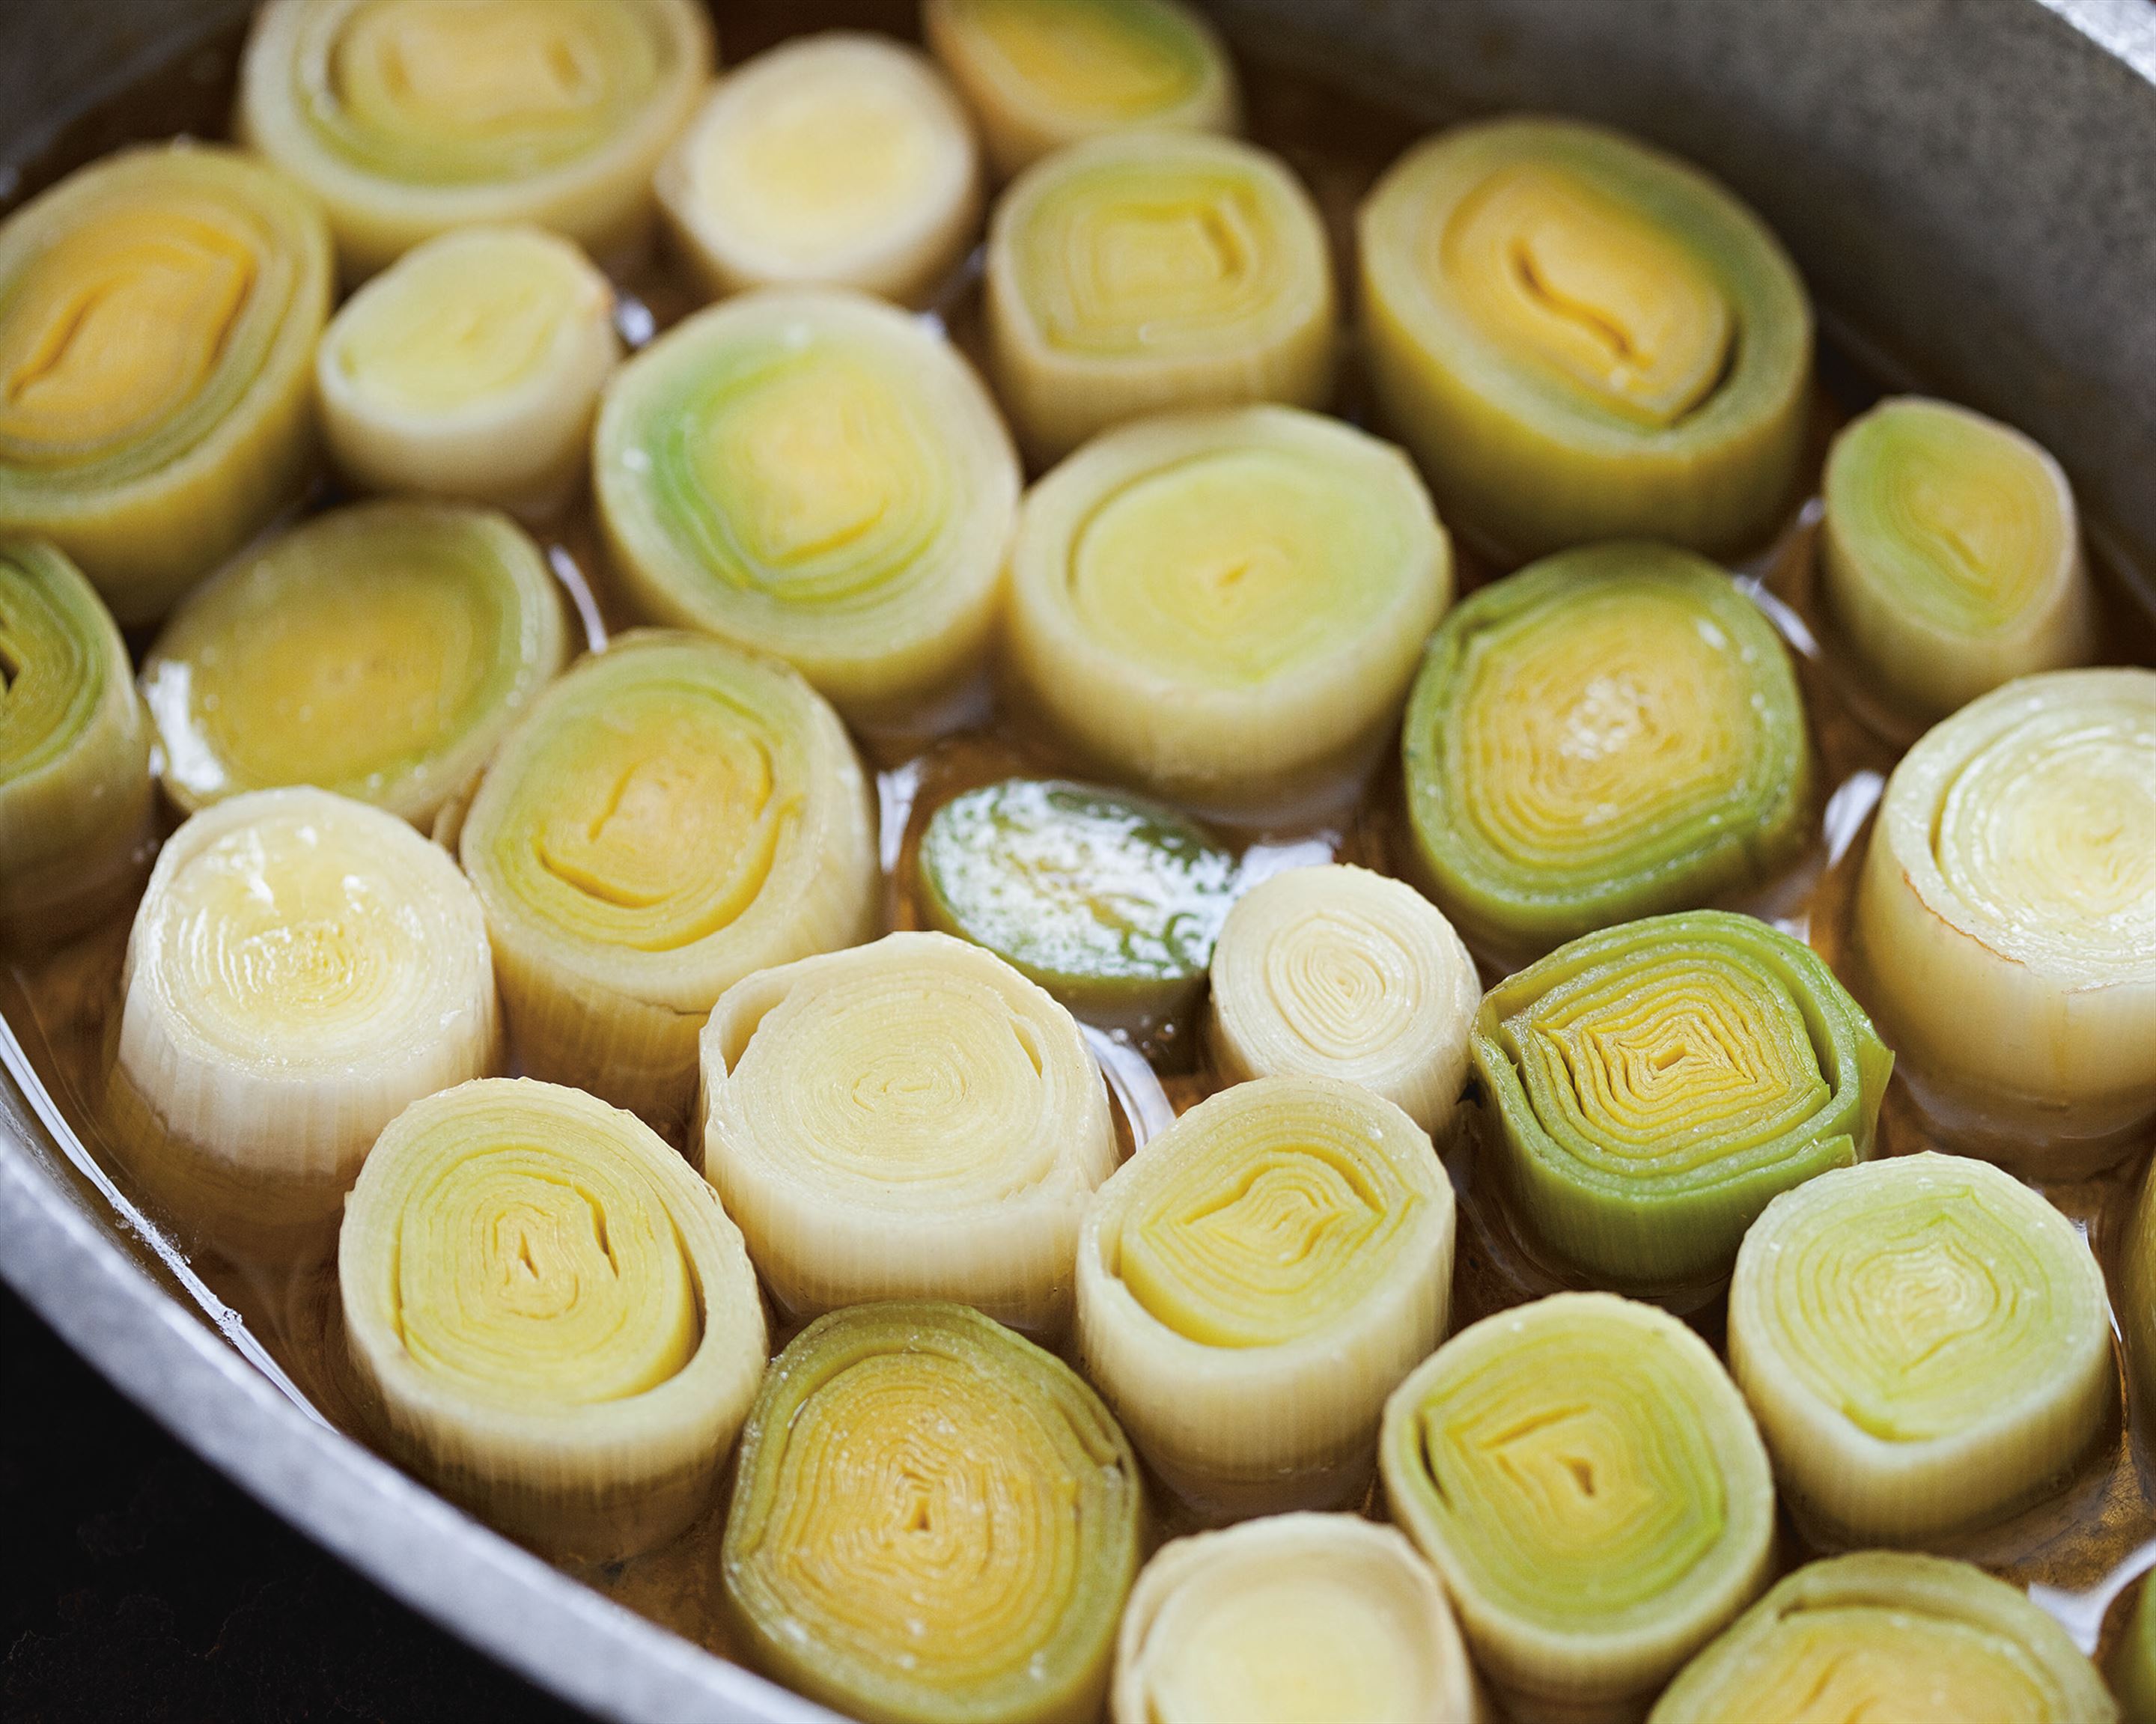 Leeks slow-cooked in olive oil